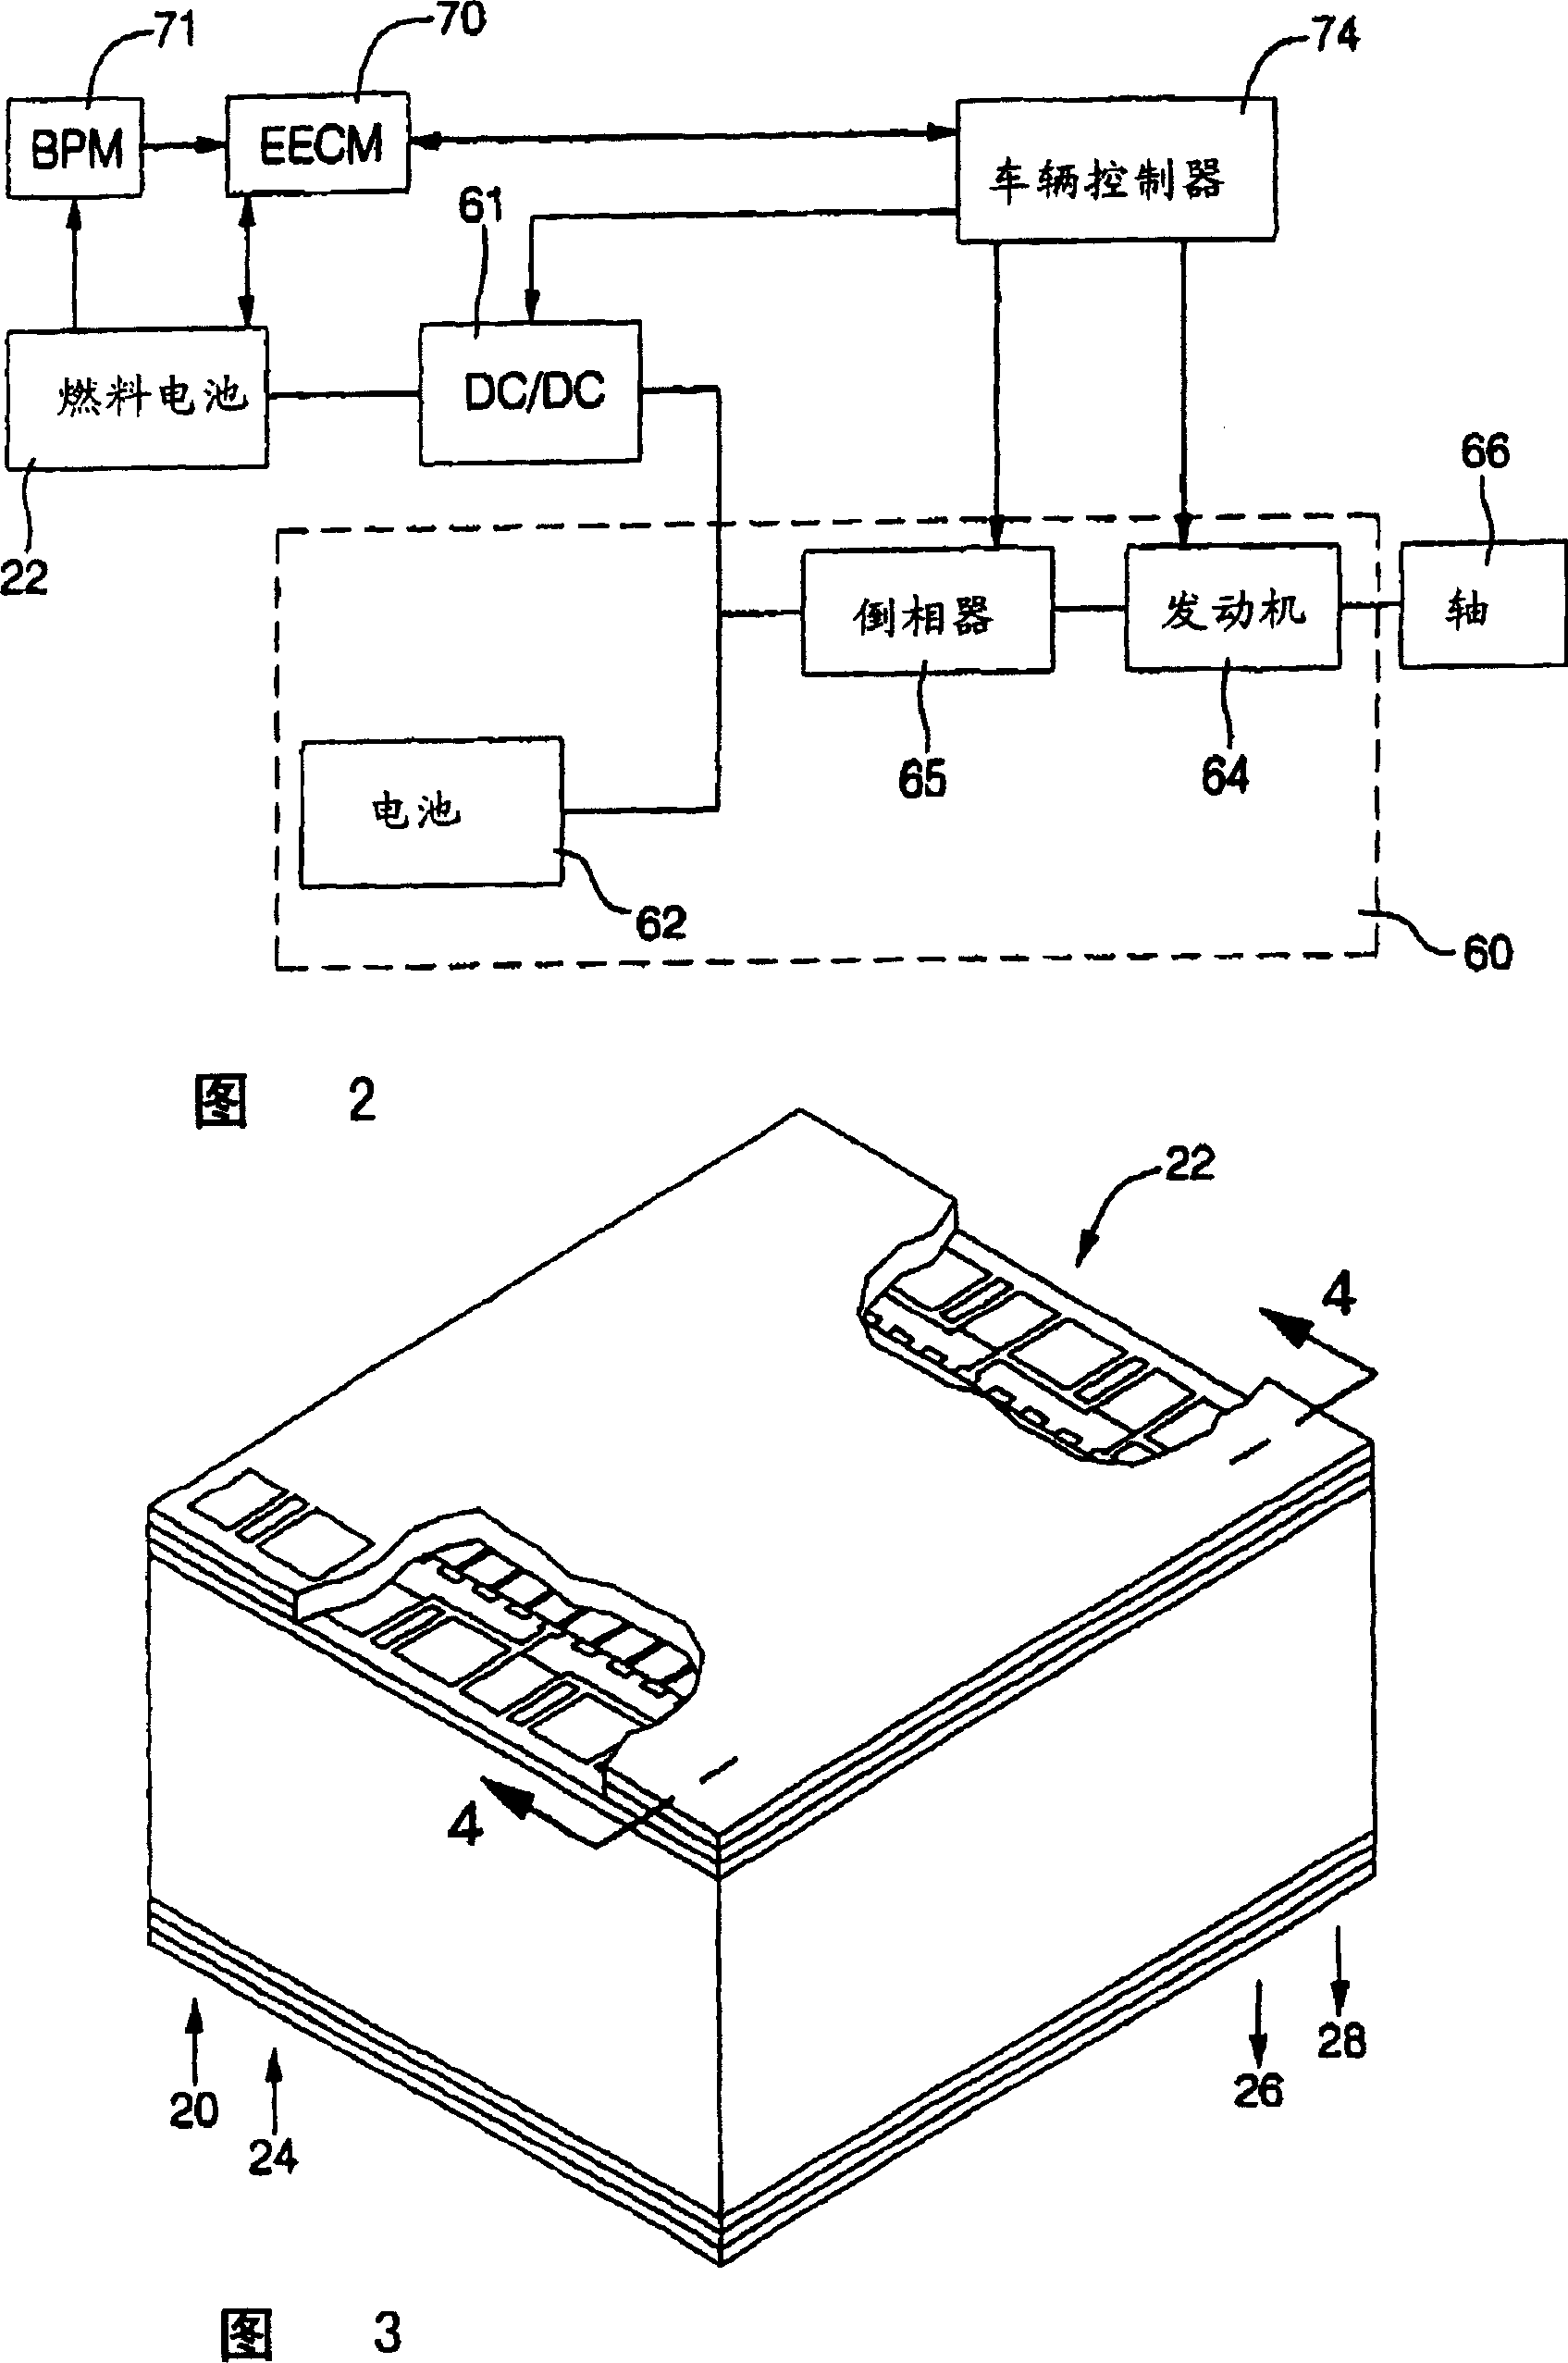 Fuel cell with variable porosity gas distribution layers